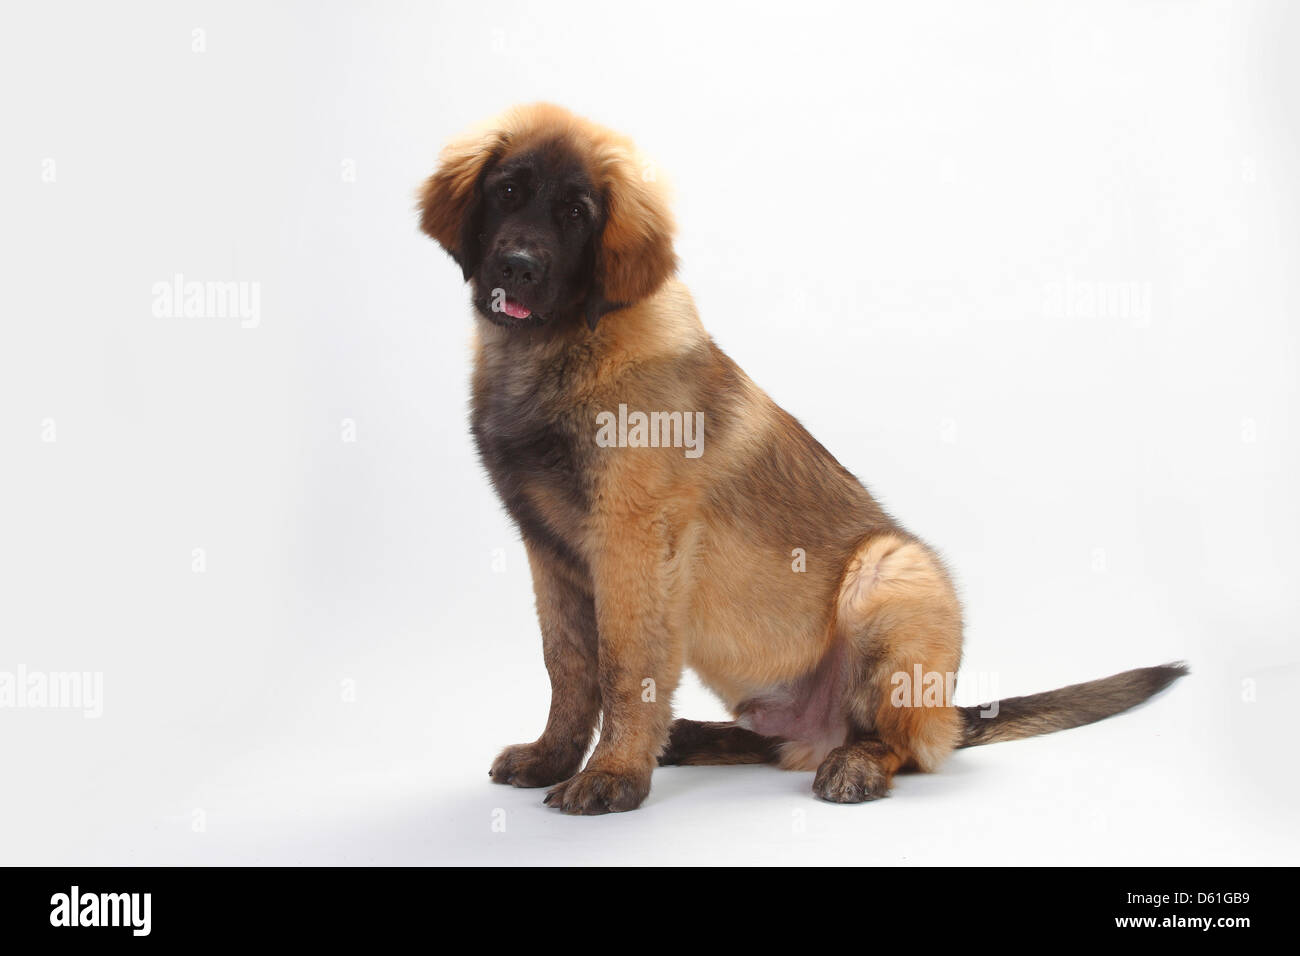 Leonberger, puppy, 5 months |Leonberger, Welpe, 5 Monate Stock Photo